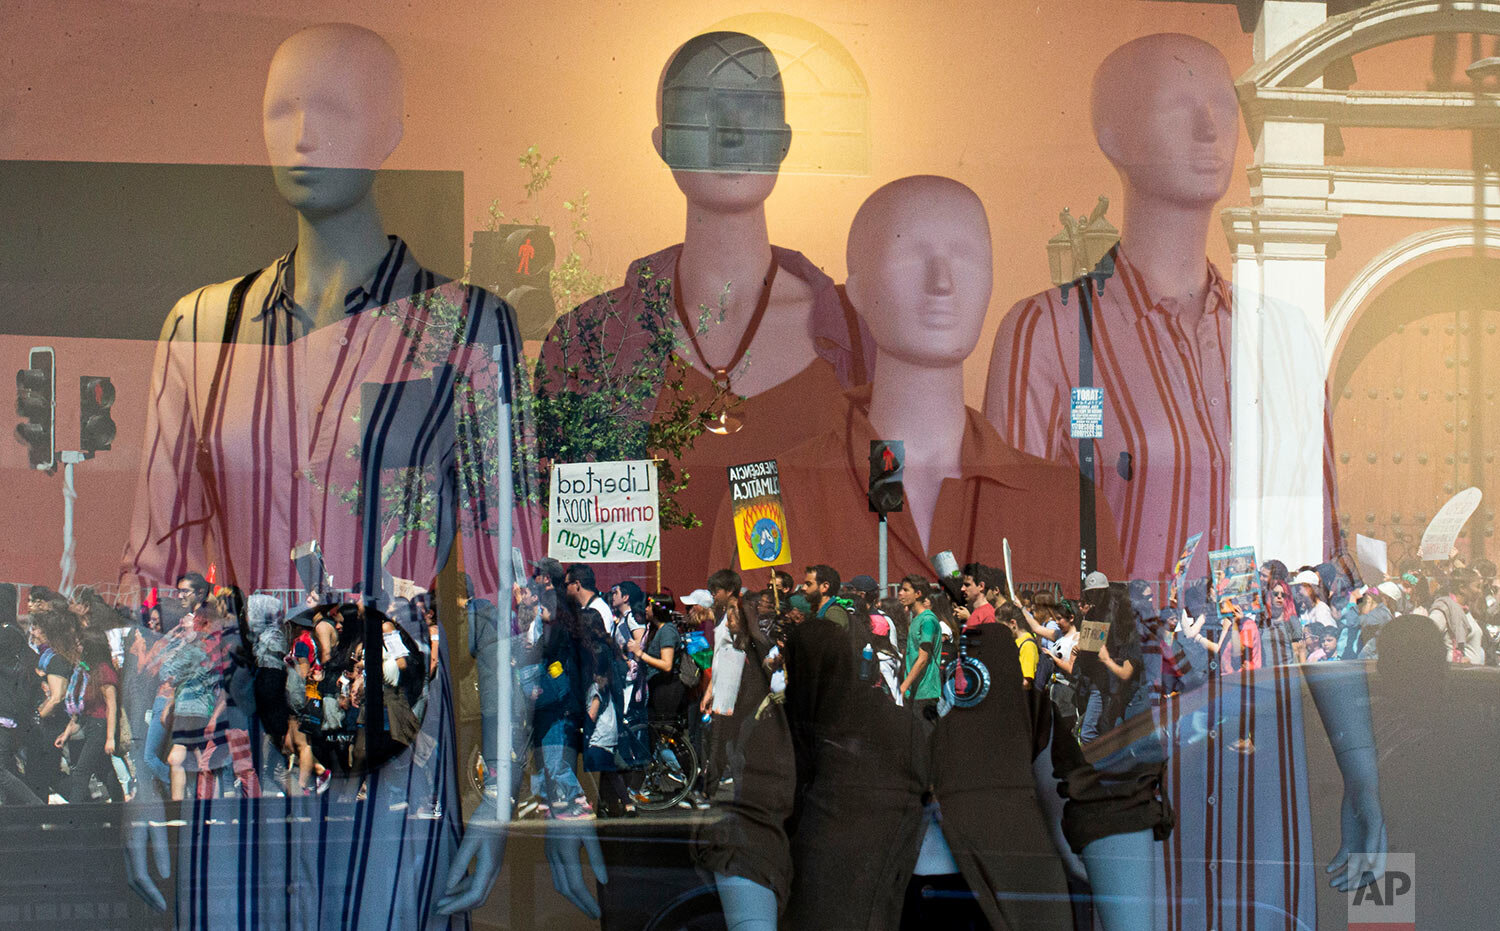  Demonstrators taking part in a global protest on climate change are reflected in a clothing store window, in Santiago, Chile, Friday, Sept. 20, 2019. Across the globe, hundreds of thousands took to the streets to demand that leaders tackle climate c